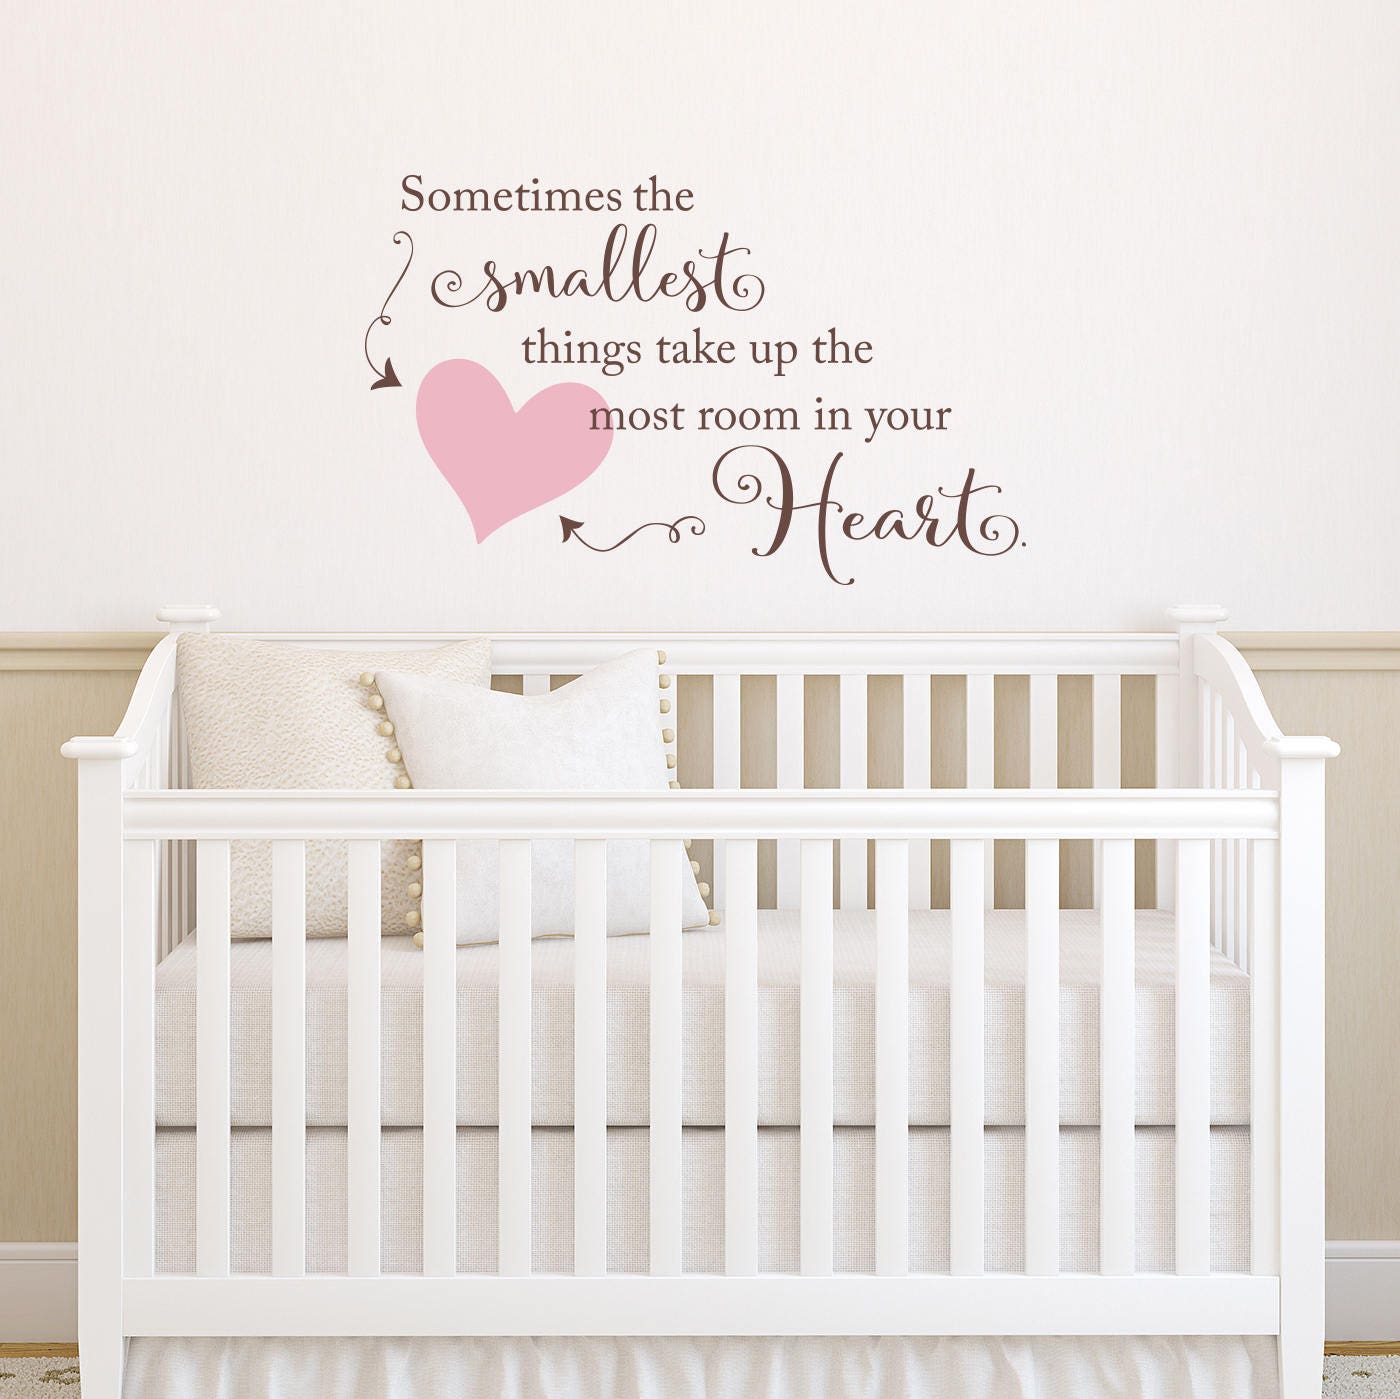 Sometimes the smallest things take up the most room in your Heart Wall Decal - Nursery Decor - Baby Wall Art